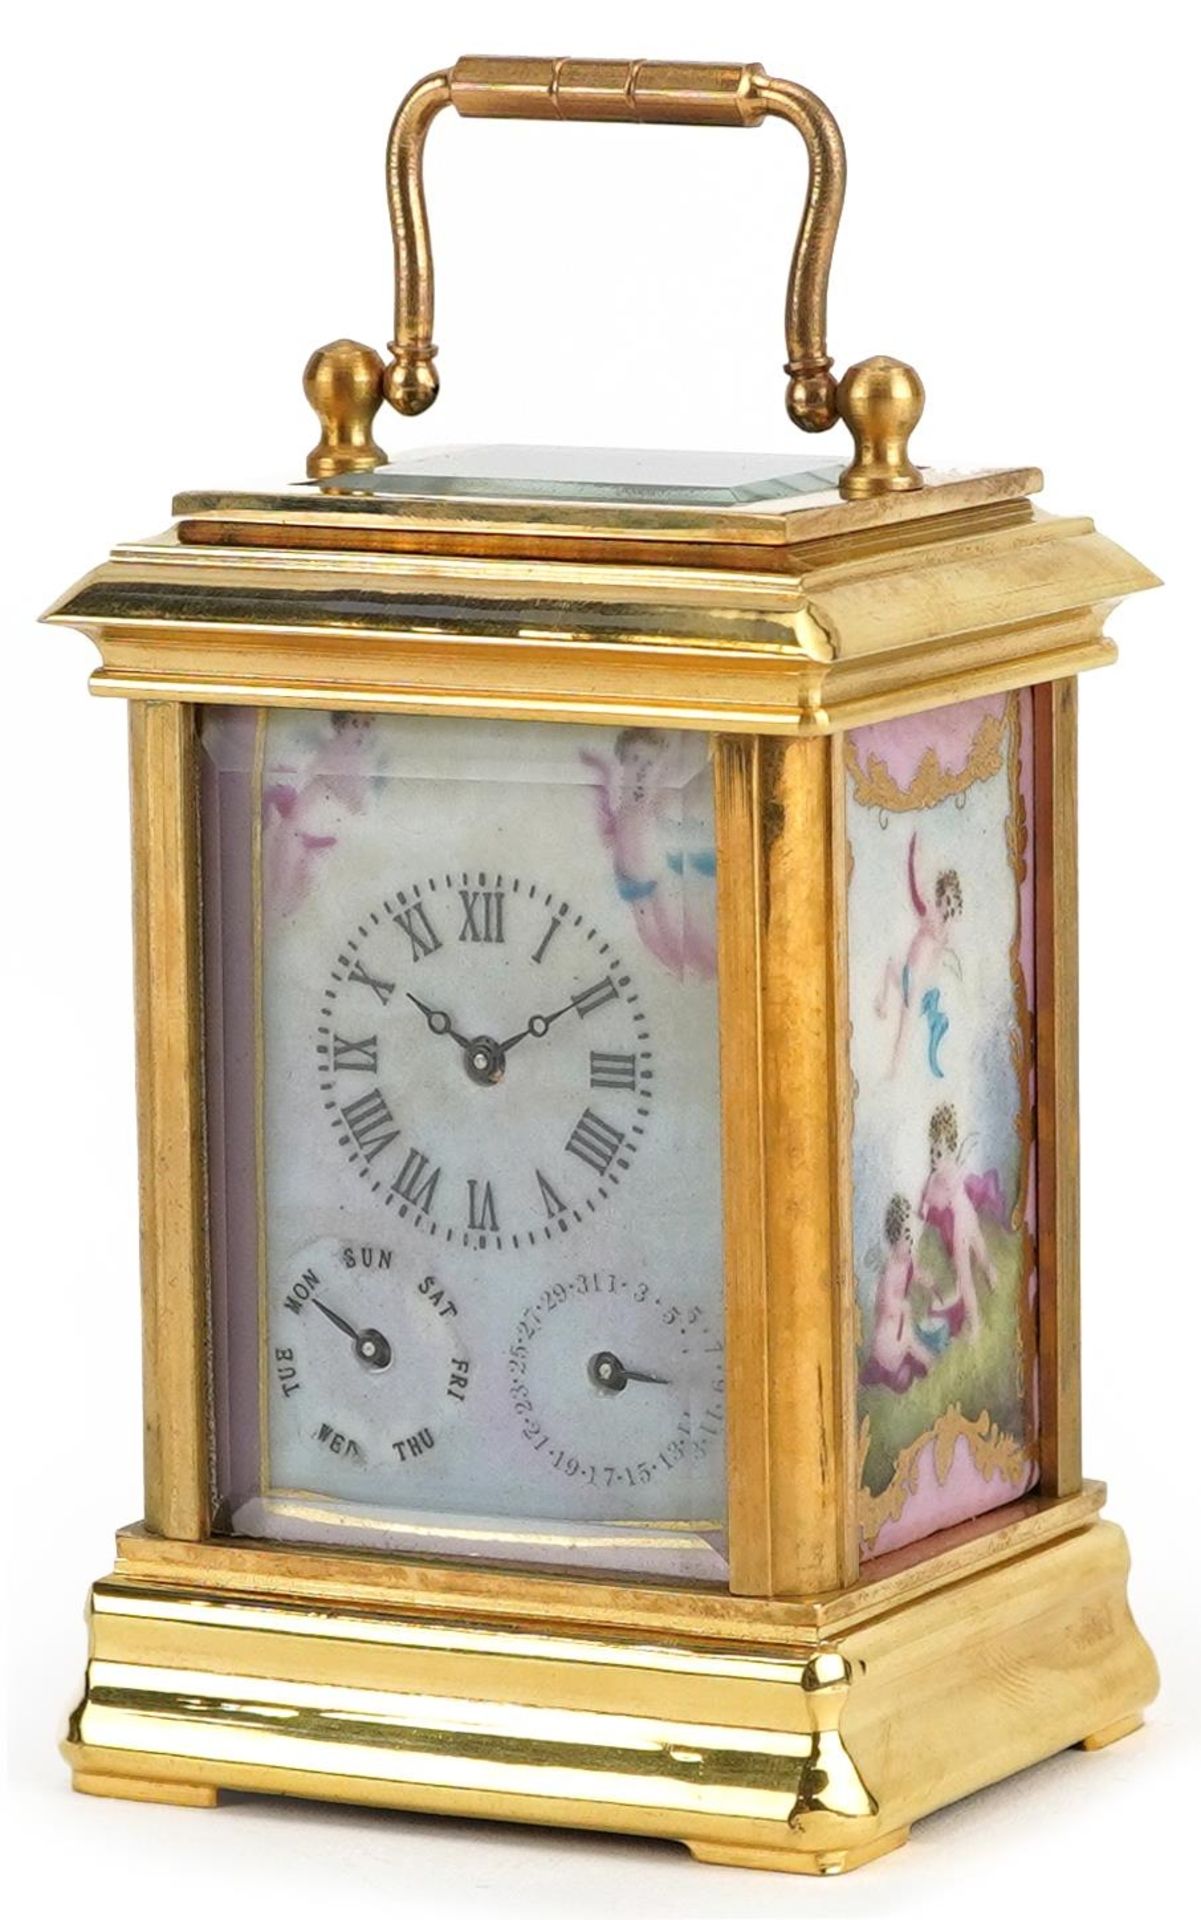 Miniature brass cased carriage clock with swing handle and Sevres style panels hand painted with